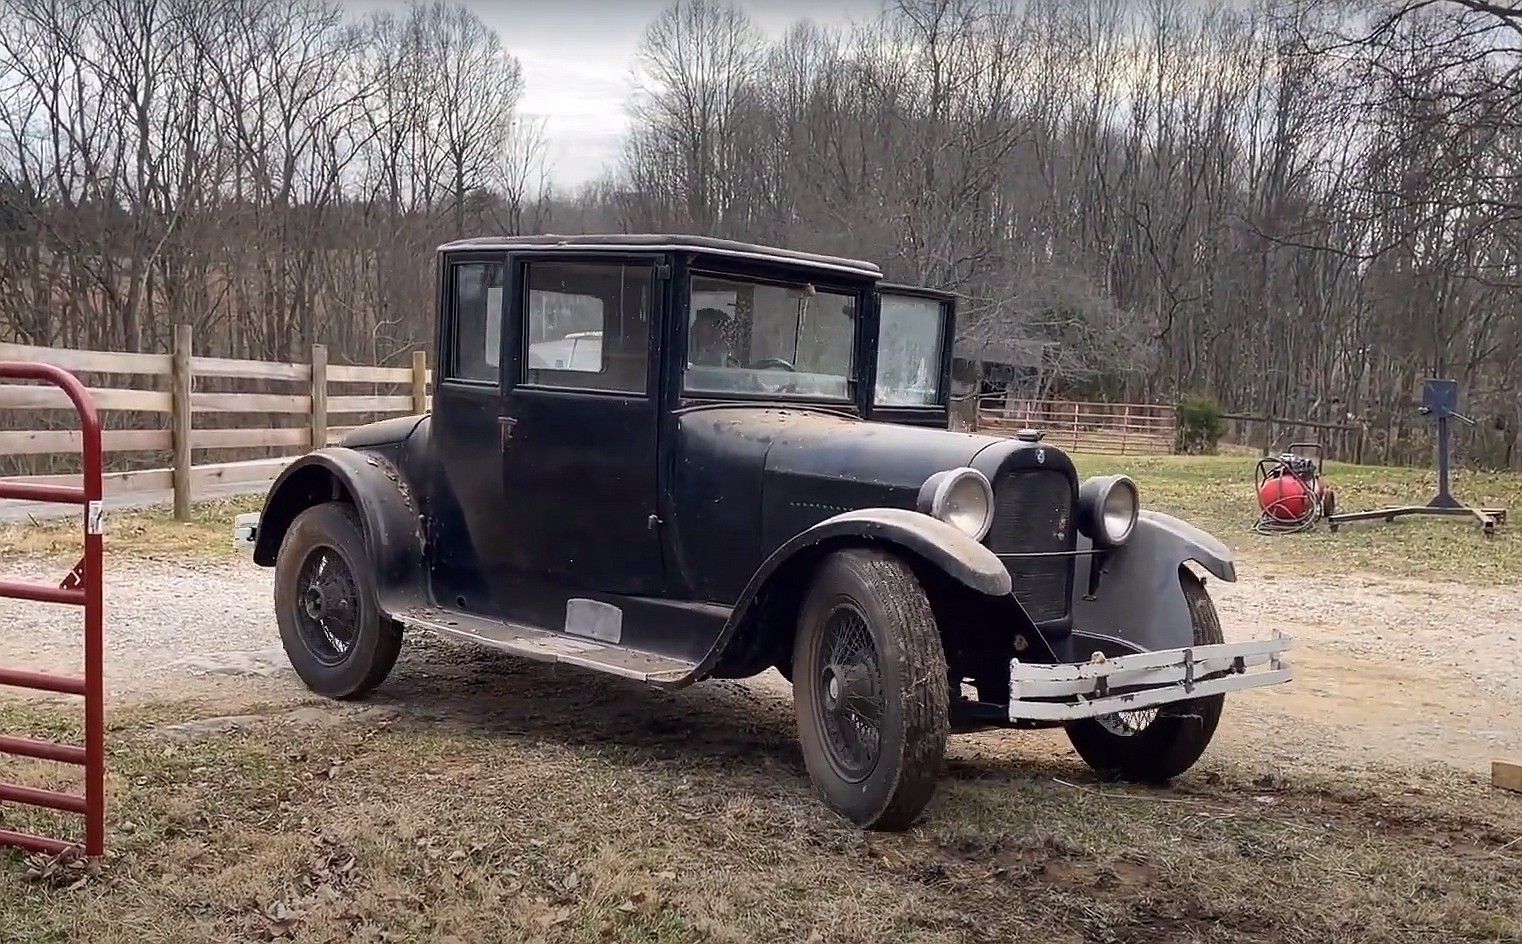 1924 Dodge Breathes New Life After Spending 83 Years Hidden Away